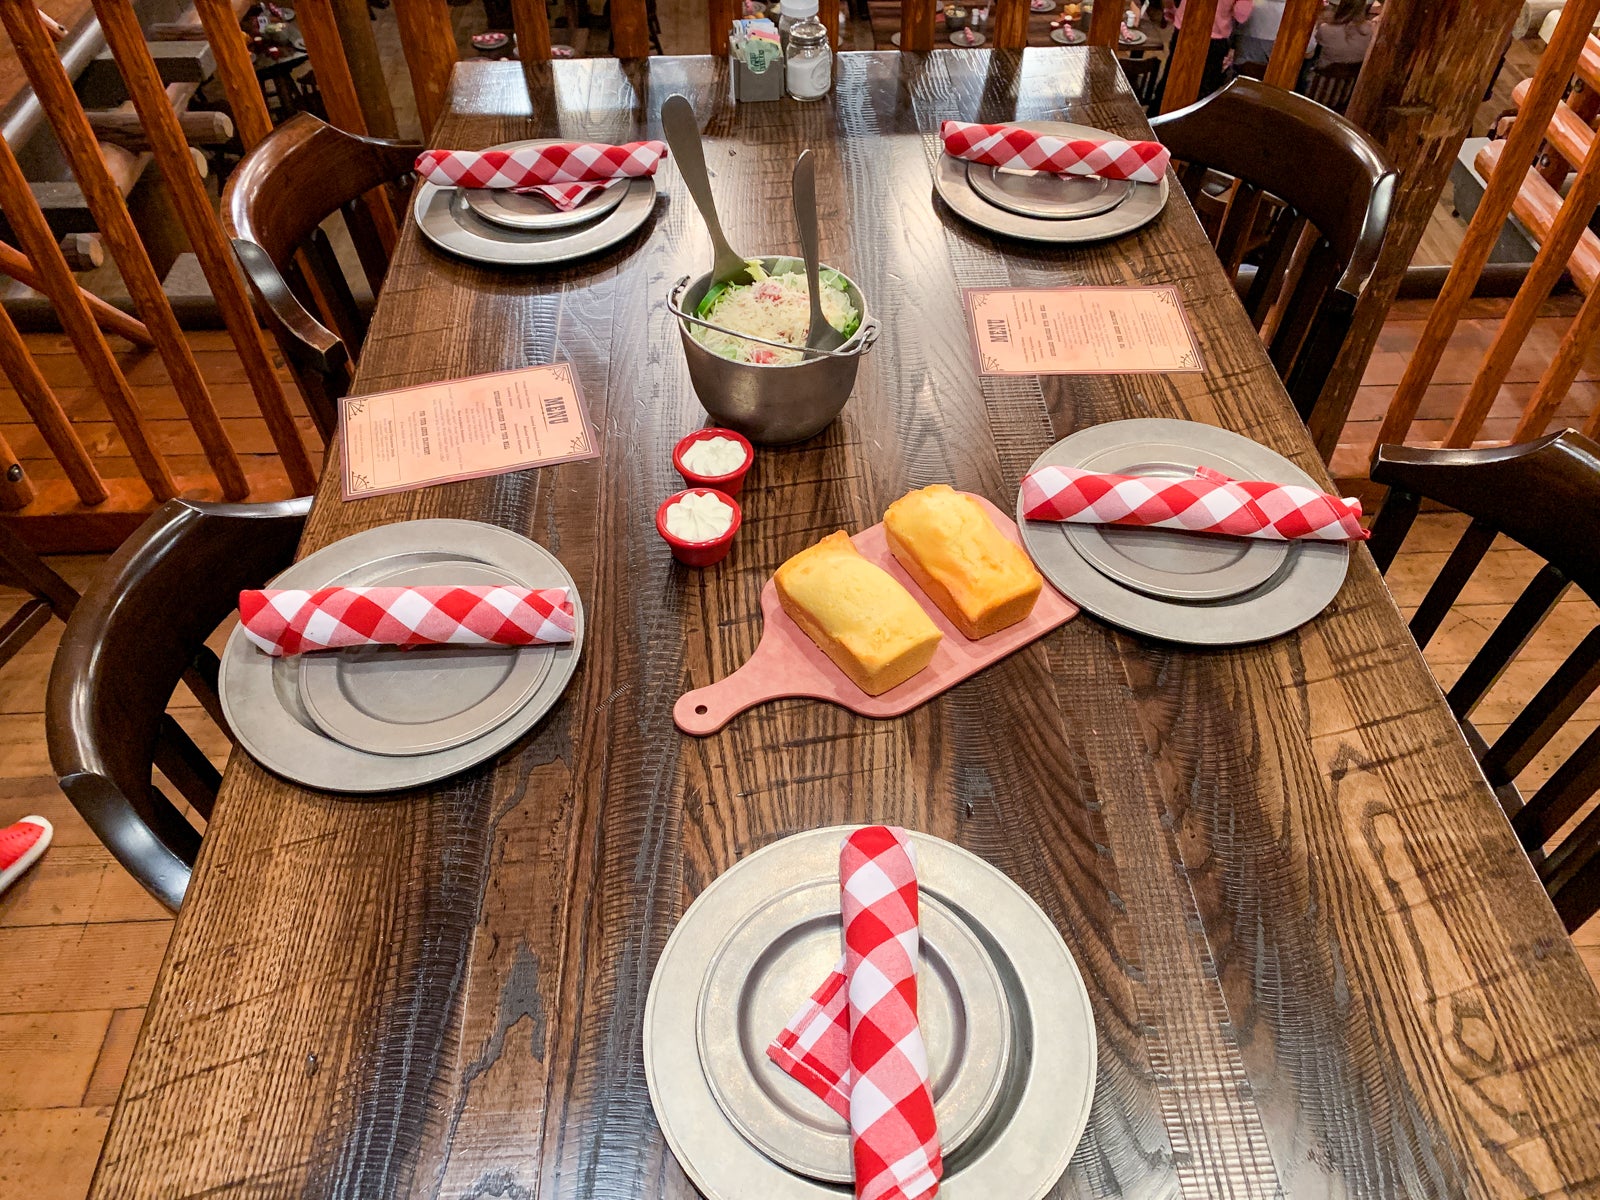 An empty table is set with metal plates, red and white checked napkins, cornbread and a bowl of salad at Hoop-Dee-Doo Revue at Disney's Fort Wilderness Resort